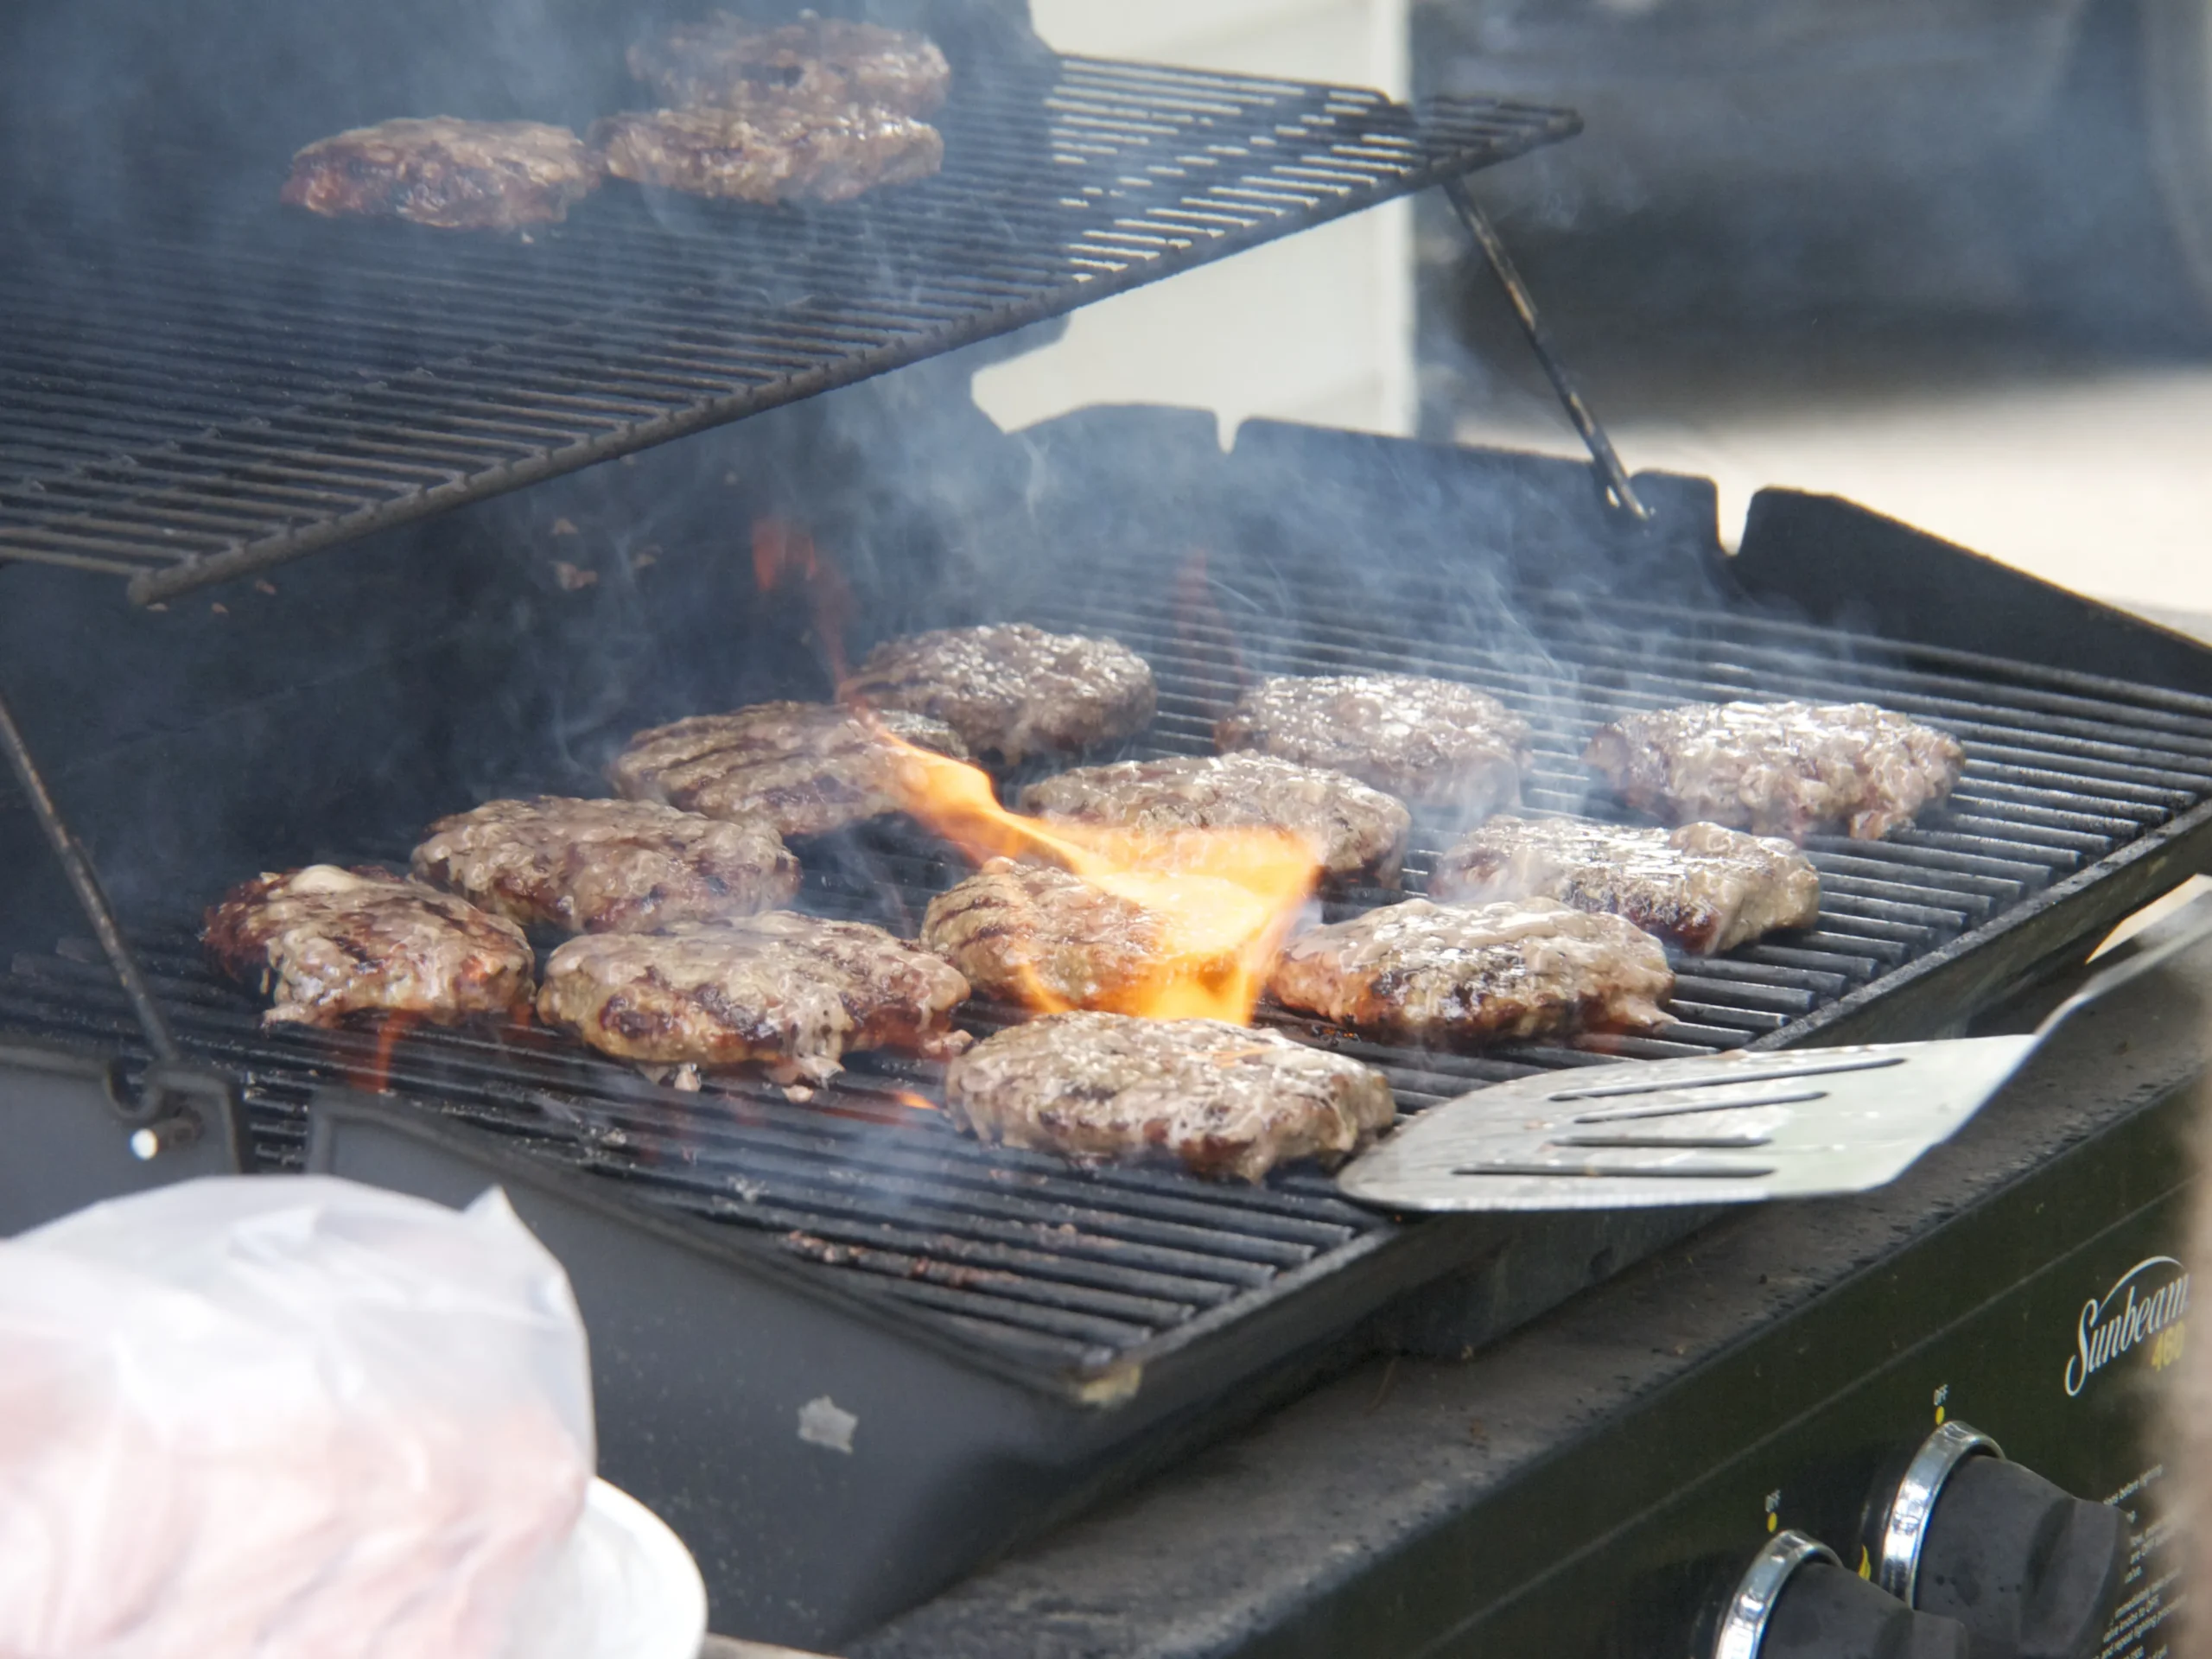 Tips to Prevent Flare-ups When Grilling Burgers